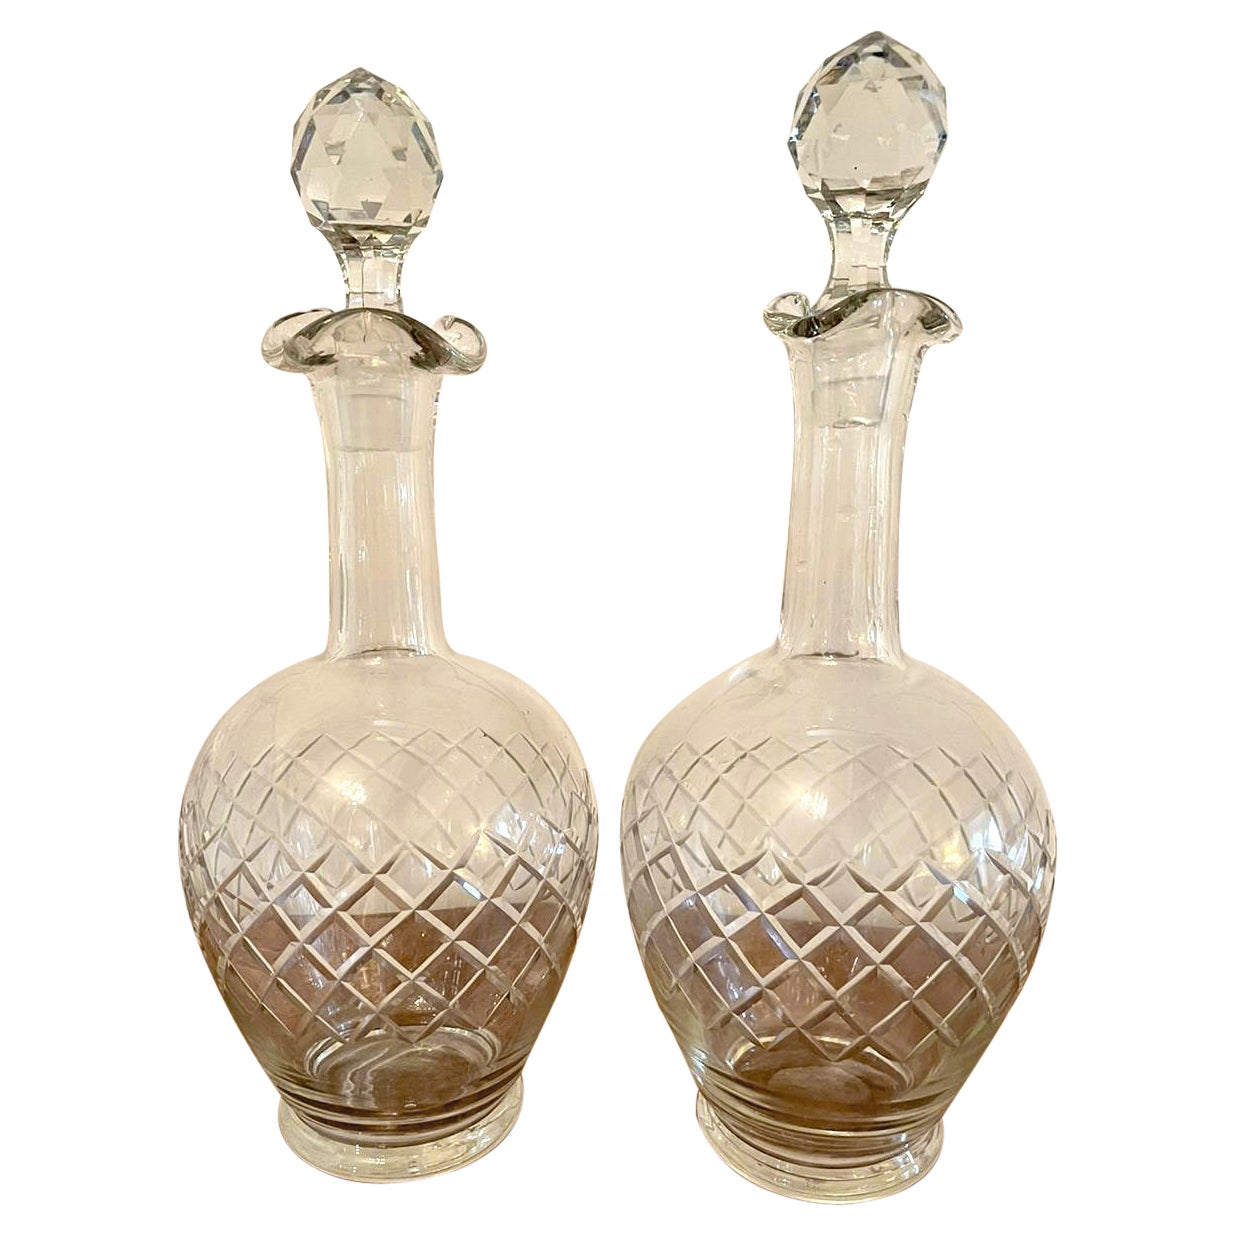 Pair of Edwardian Cut Glass Decanters For Sale